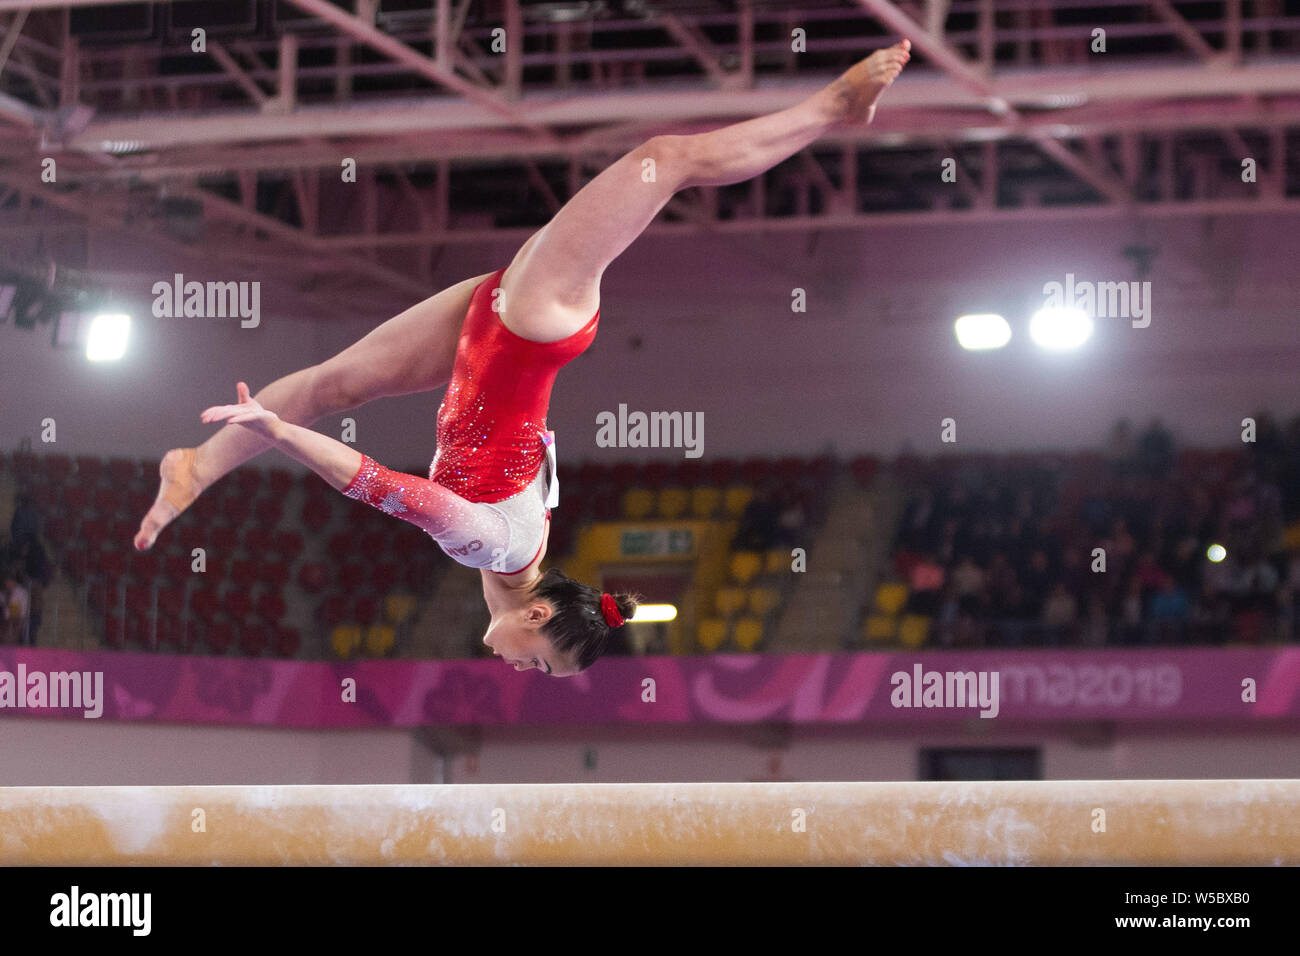 Lima, Peru. 27th July, 2019. Victoria Woo (#17) performs her beam routine during the Pan American Games Women's Artistic Gymnastics, Qualification and Team Final at Polideportivo Villa el Salvador in Lima, Peru. Daniel Lea/CSM/Alamy Live News Stock Photo